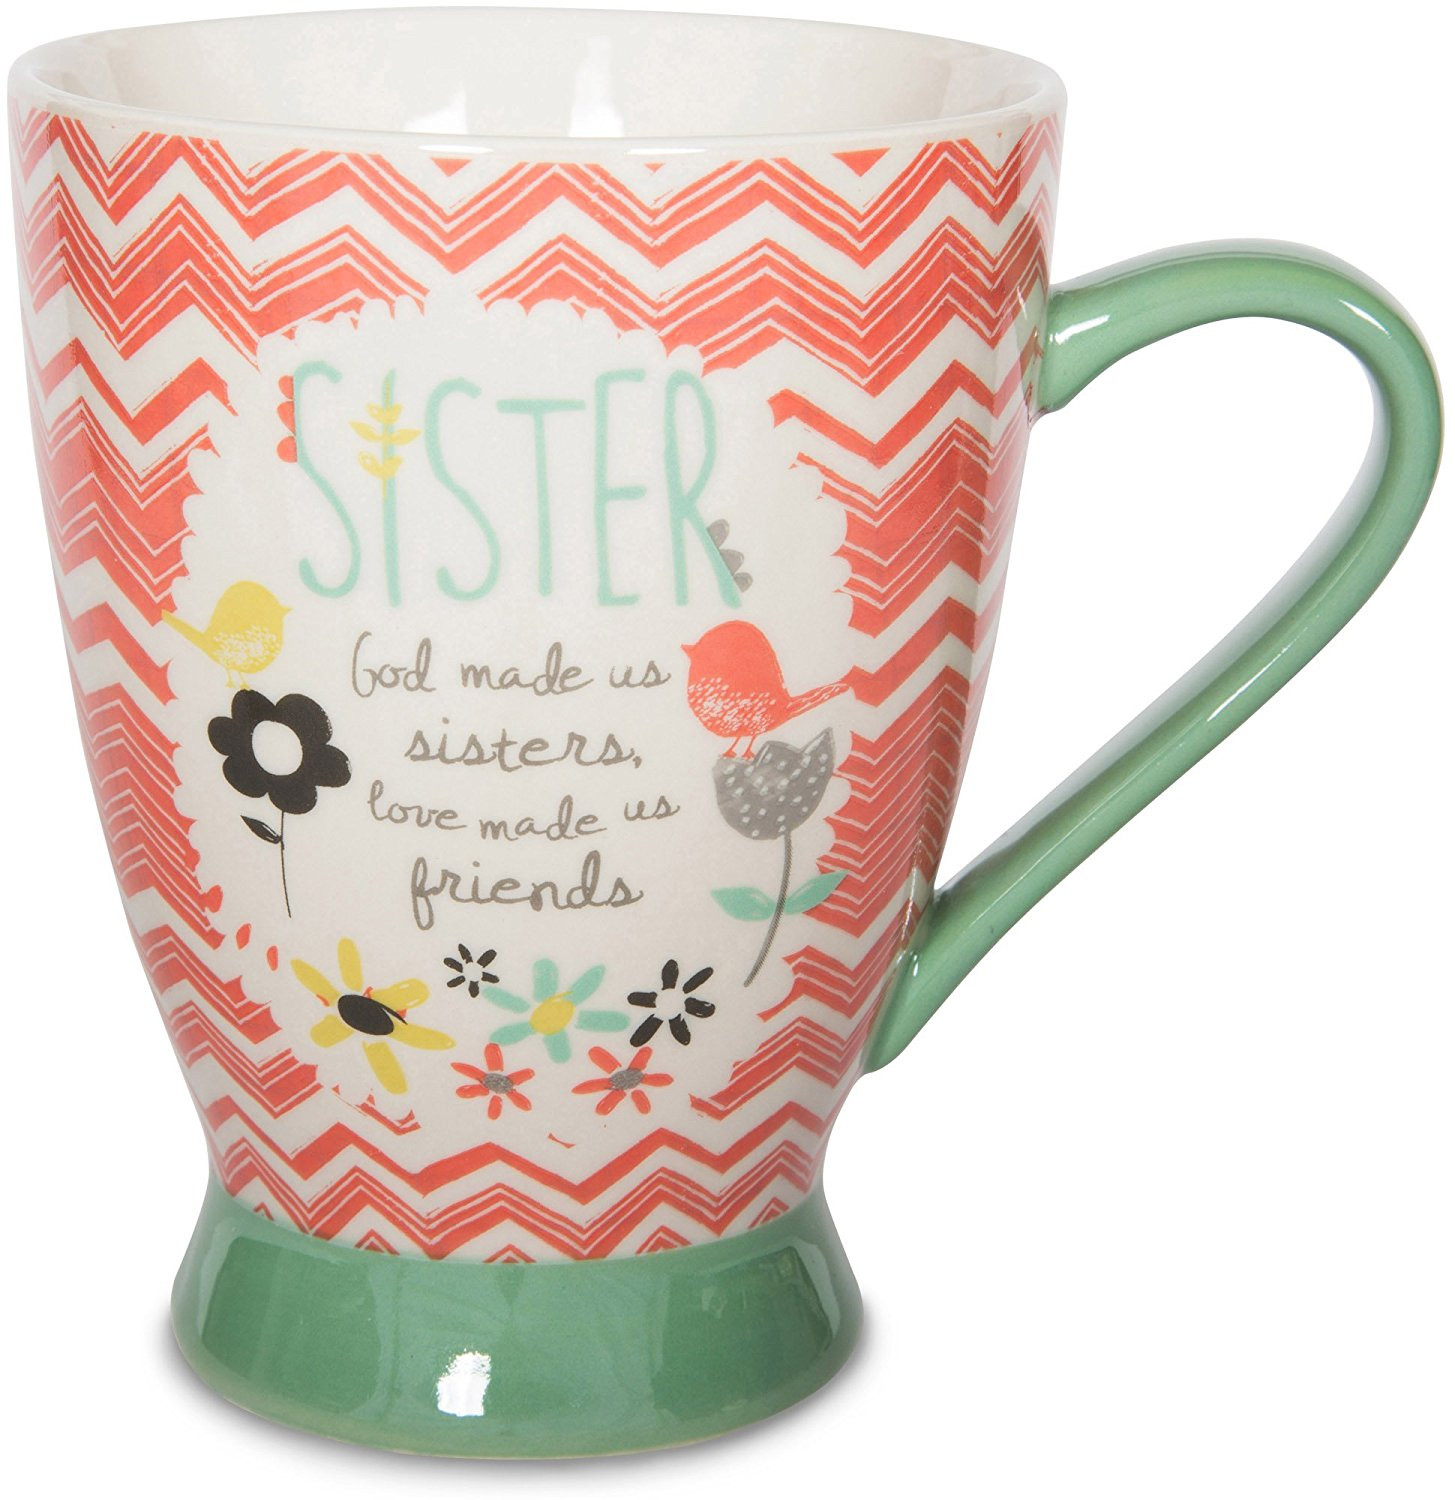 Gift Ideas For Sisters Birthday
 105 Perfect Birthday Gift Ideas for Sister